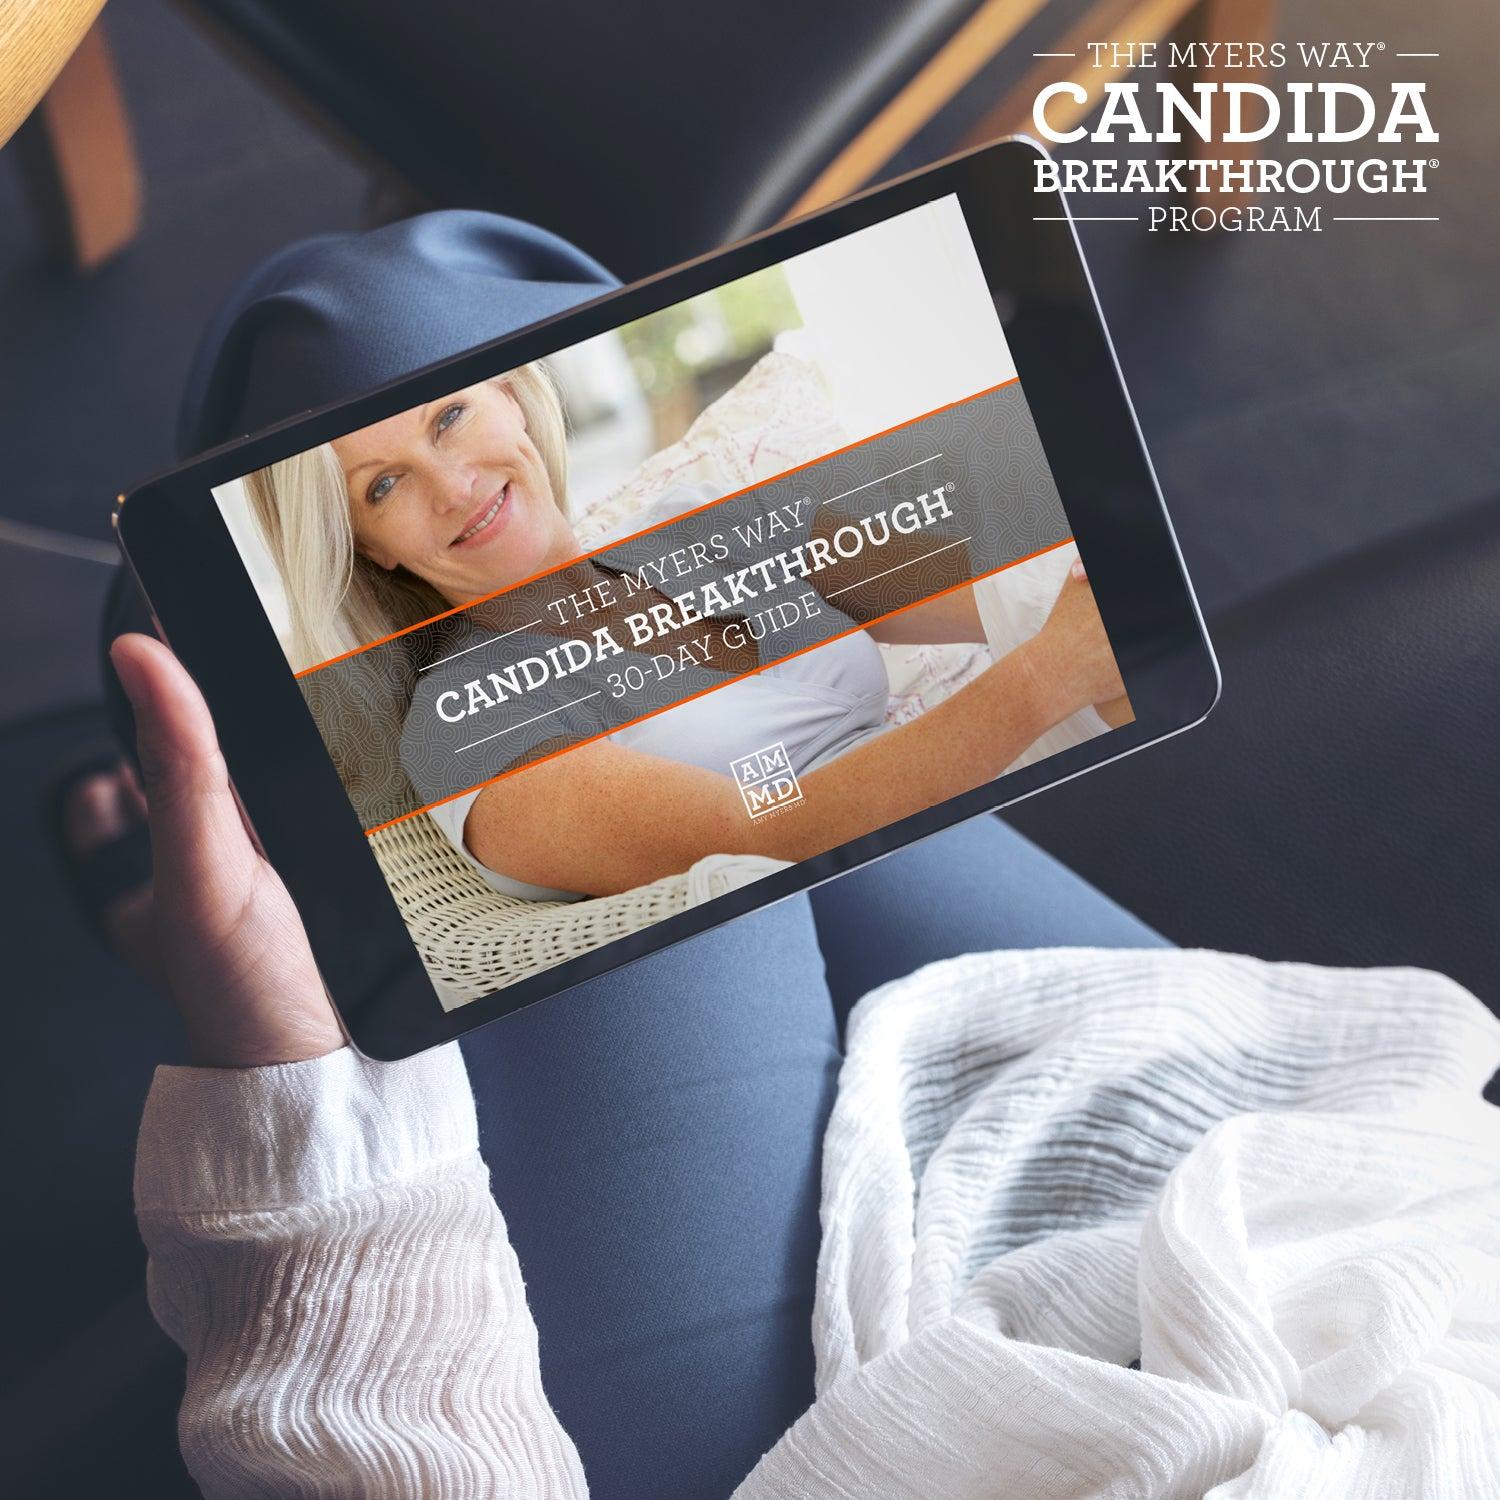 A Woman views The Candida Breakthrough Program 30-day Guide on a tablet - Amy Myers MD®